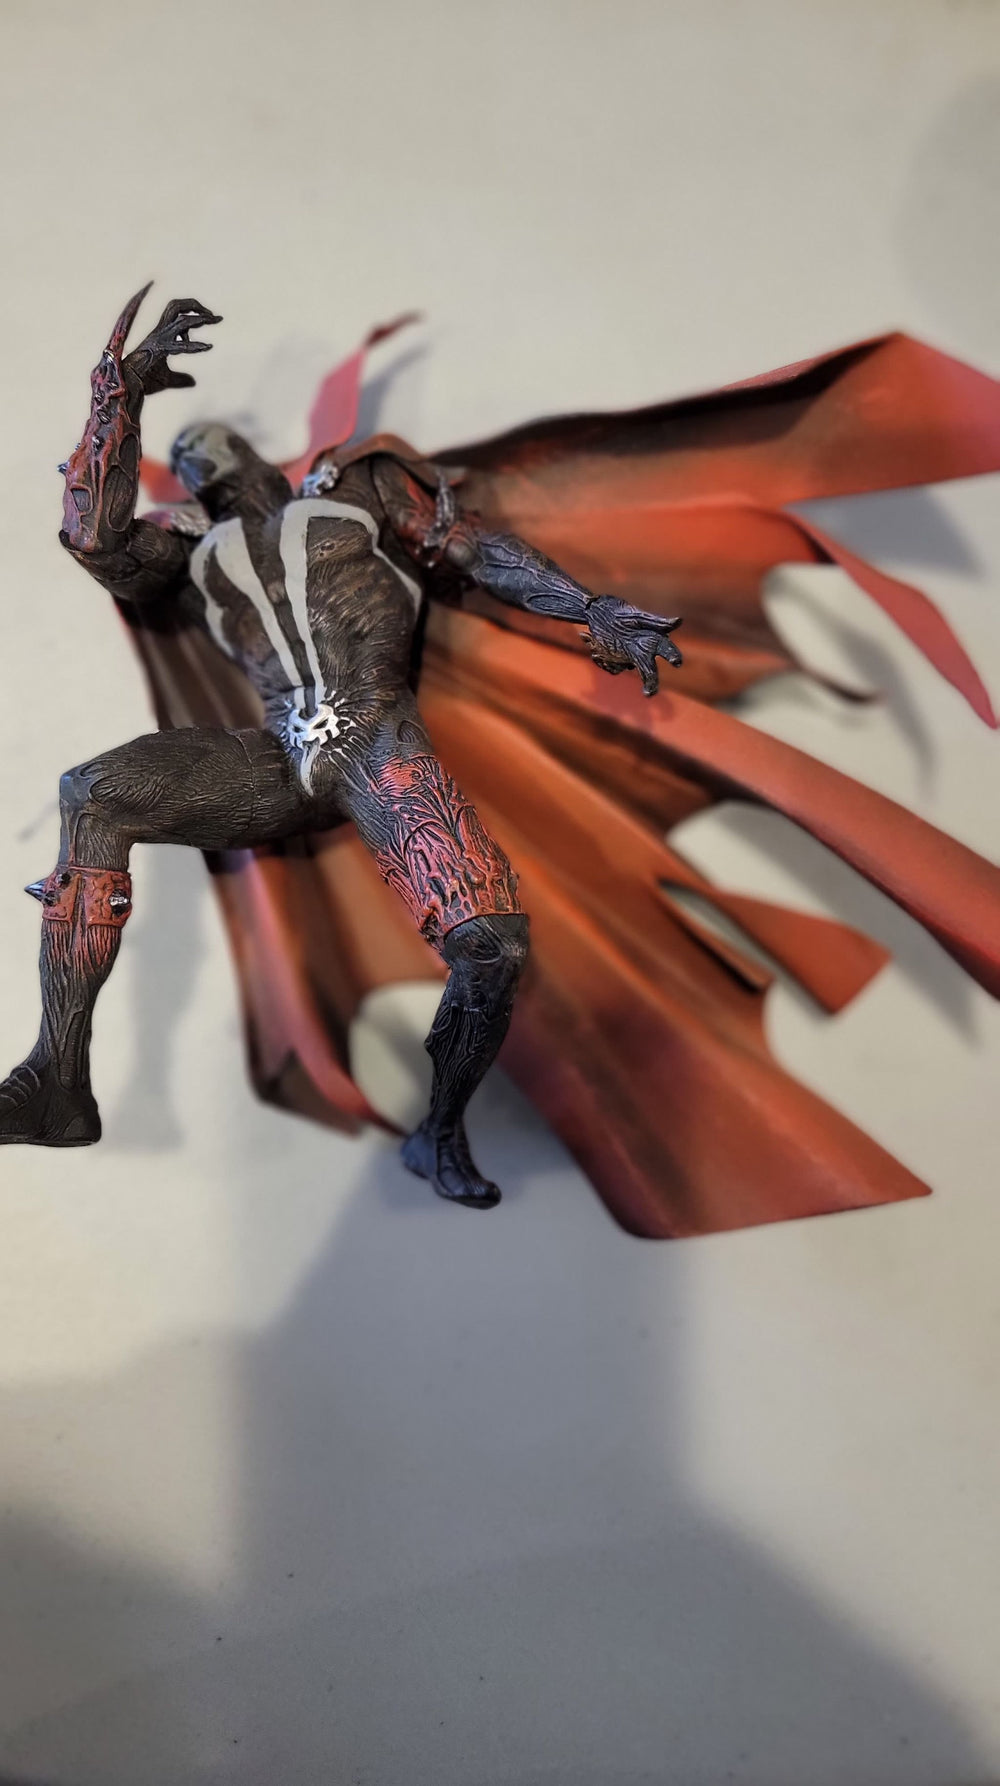 SPAWN Action Figure (LOOSE - As Shown)